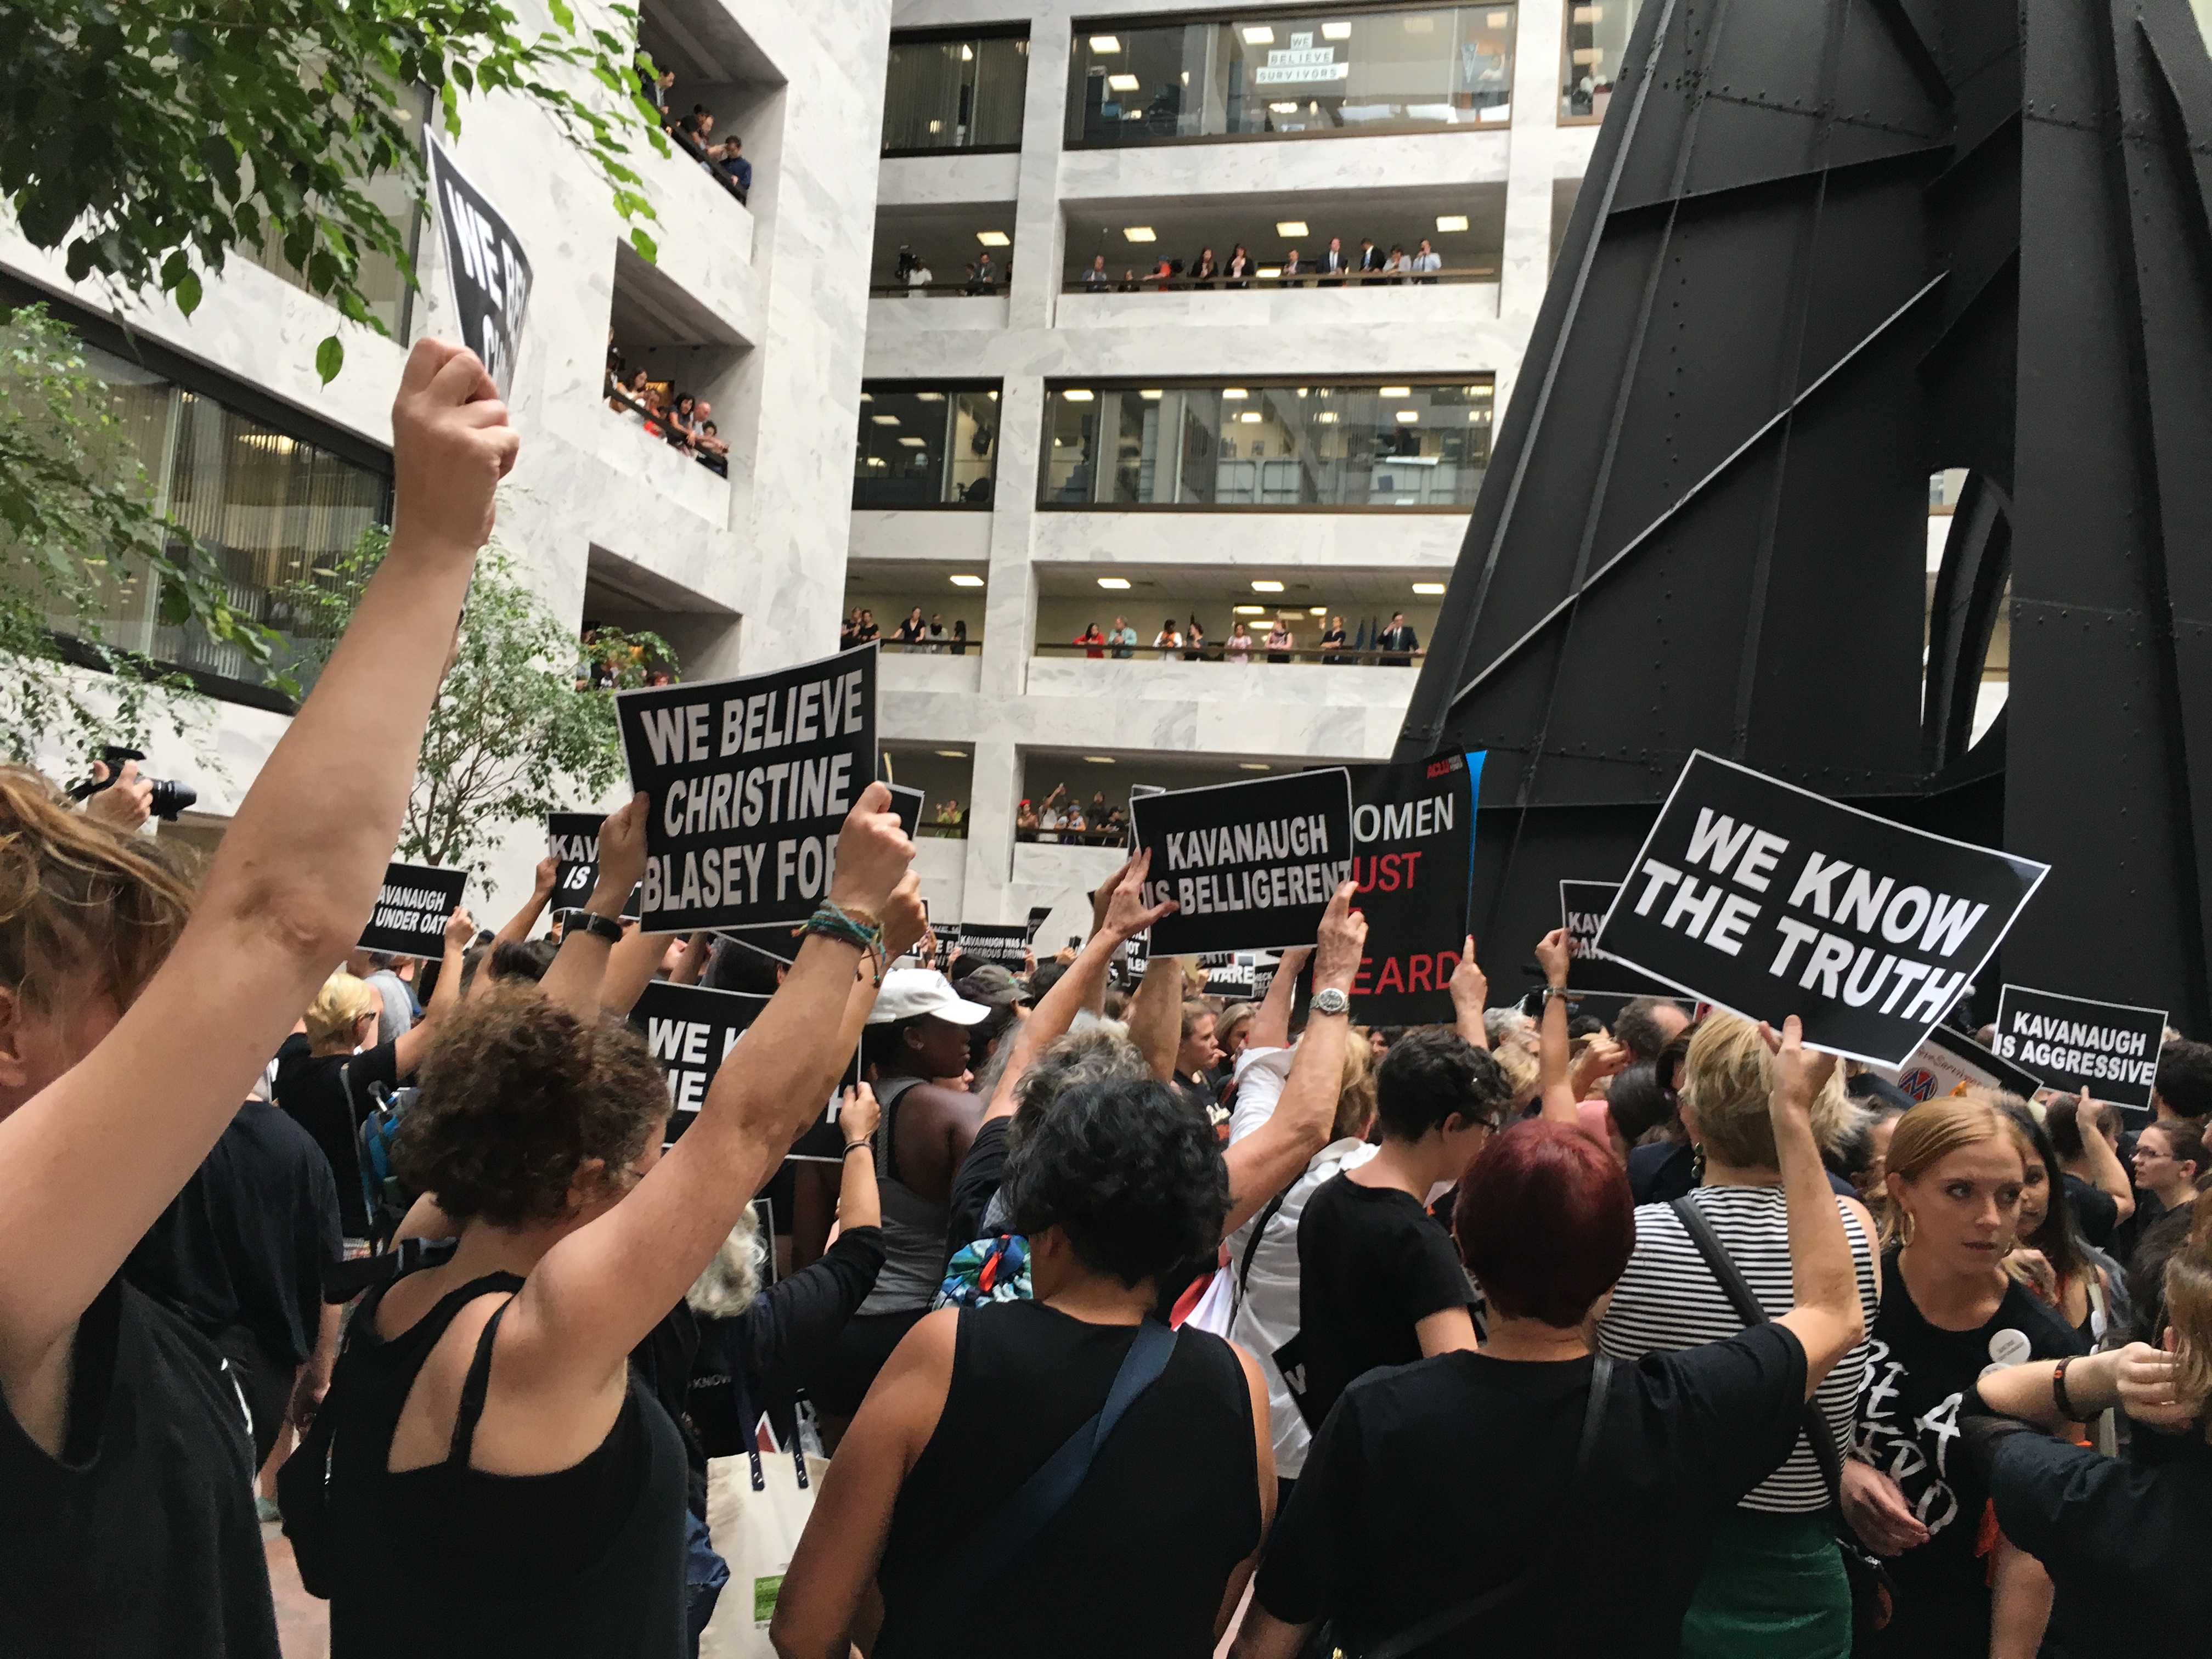 Protesters filled the Hart Senate Building on Oct. 4 to protest the nomination of Judge Brett Kavanaugh to the Supreme Court. (Charlotte Alter -- TIME)